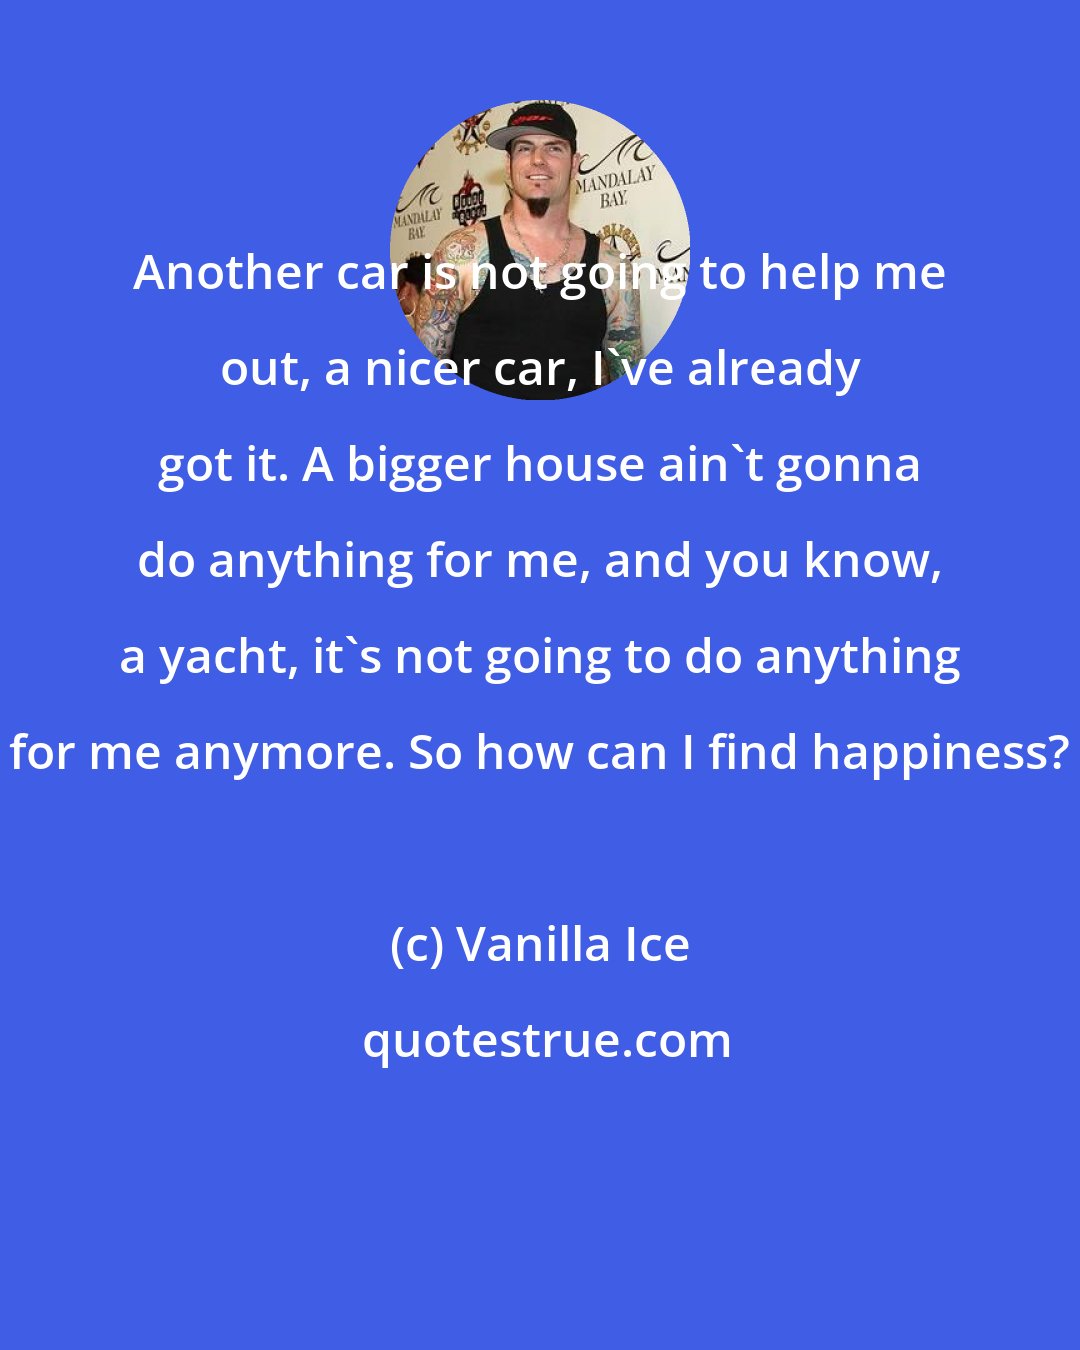 Vanilla Ice: Another car is not going to help me out, a nicer car, I've already got it. A bigger house ain't gonna do anything for me, and you know, a yacht, it's not going to do anything for me anymore. So how can I find happiness?